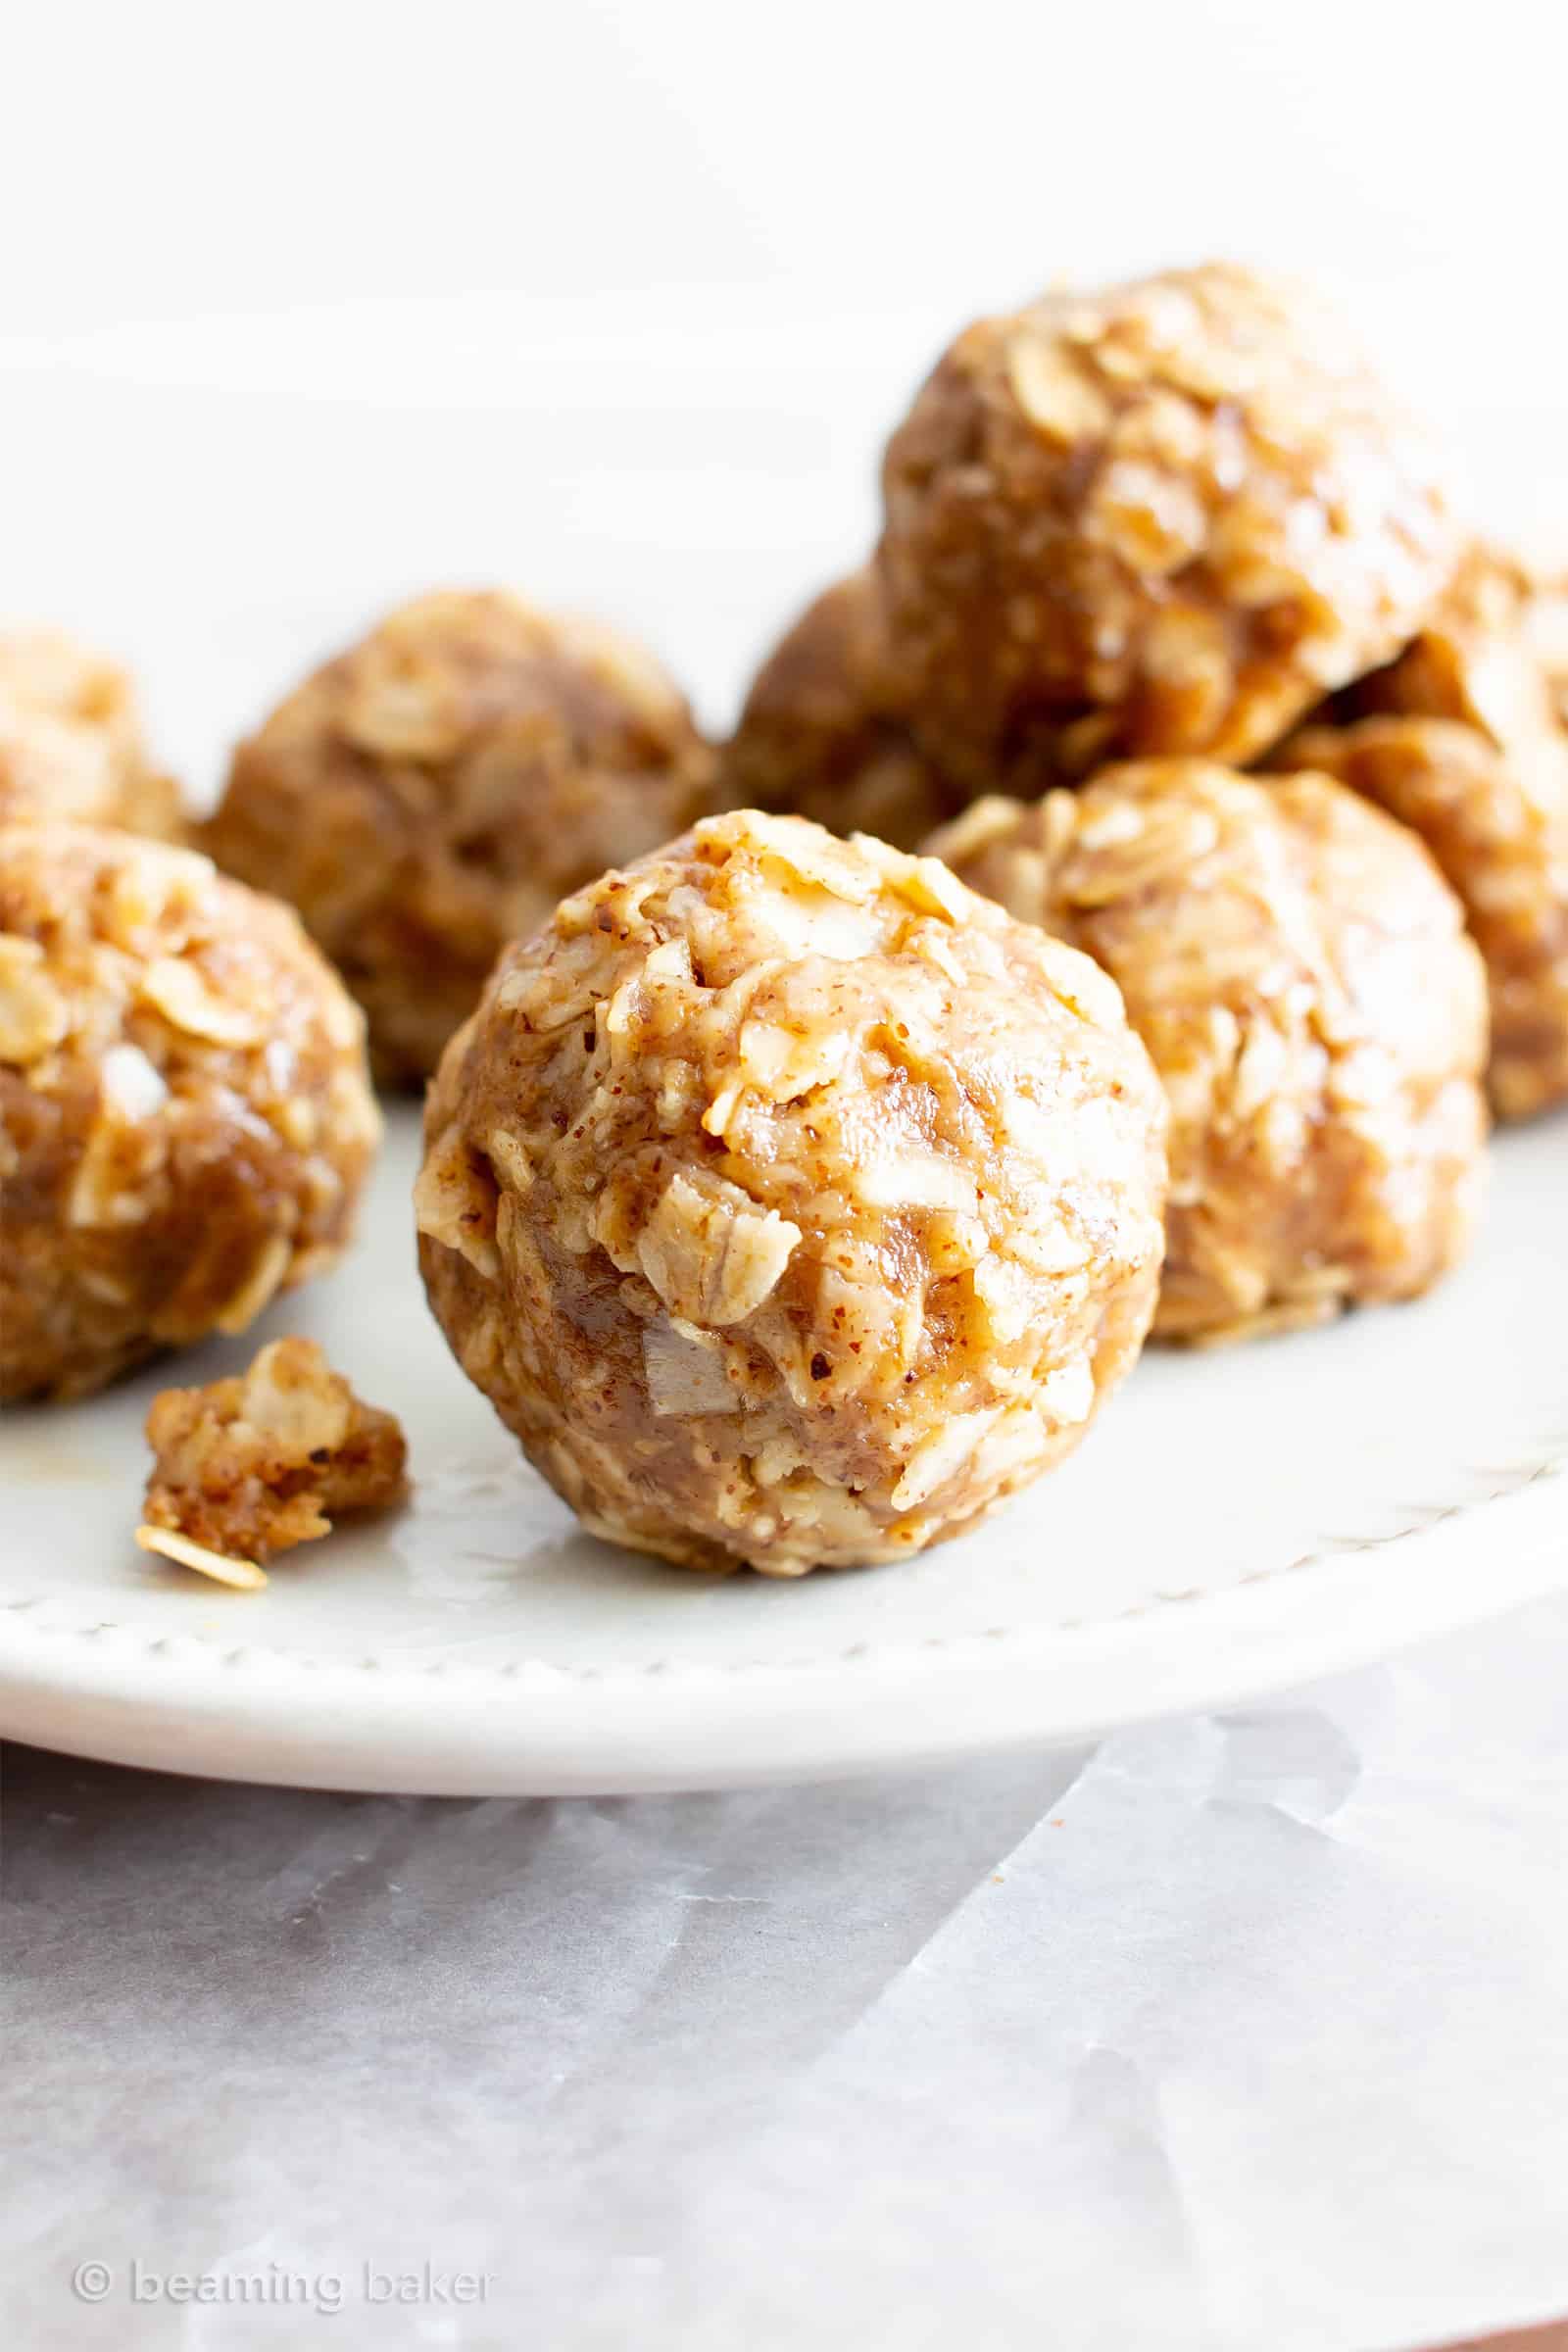 20+ Easy No Bake Energy Bites Recipes (V, GF): the best collection of healthy and tasty no bake energy bites recipes! Perfect for meal prep, on the go breakfasts, workout snacks and more! #Vegan #GlutenFree #DairyFree #RefinedSugarFree #Healthy #NoBake #Snacks | Recipes on BeamingBaker.com